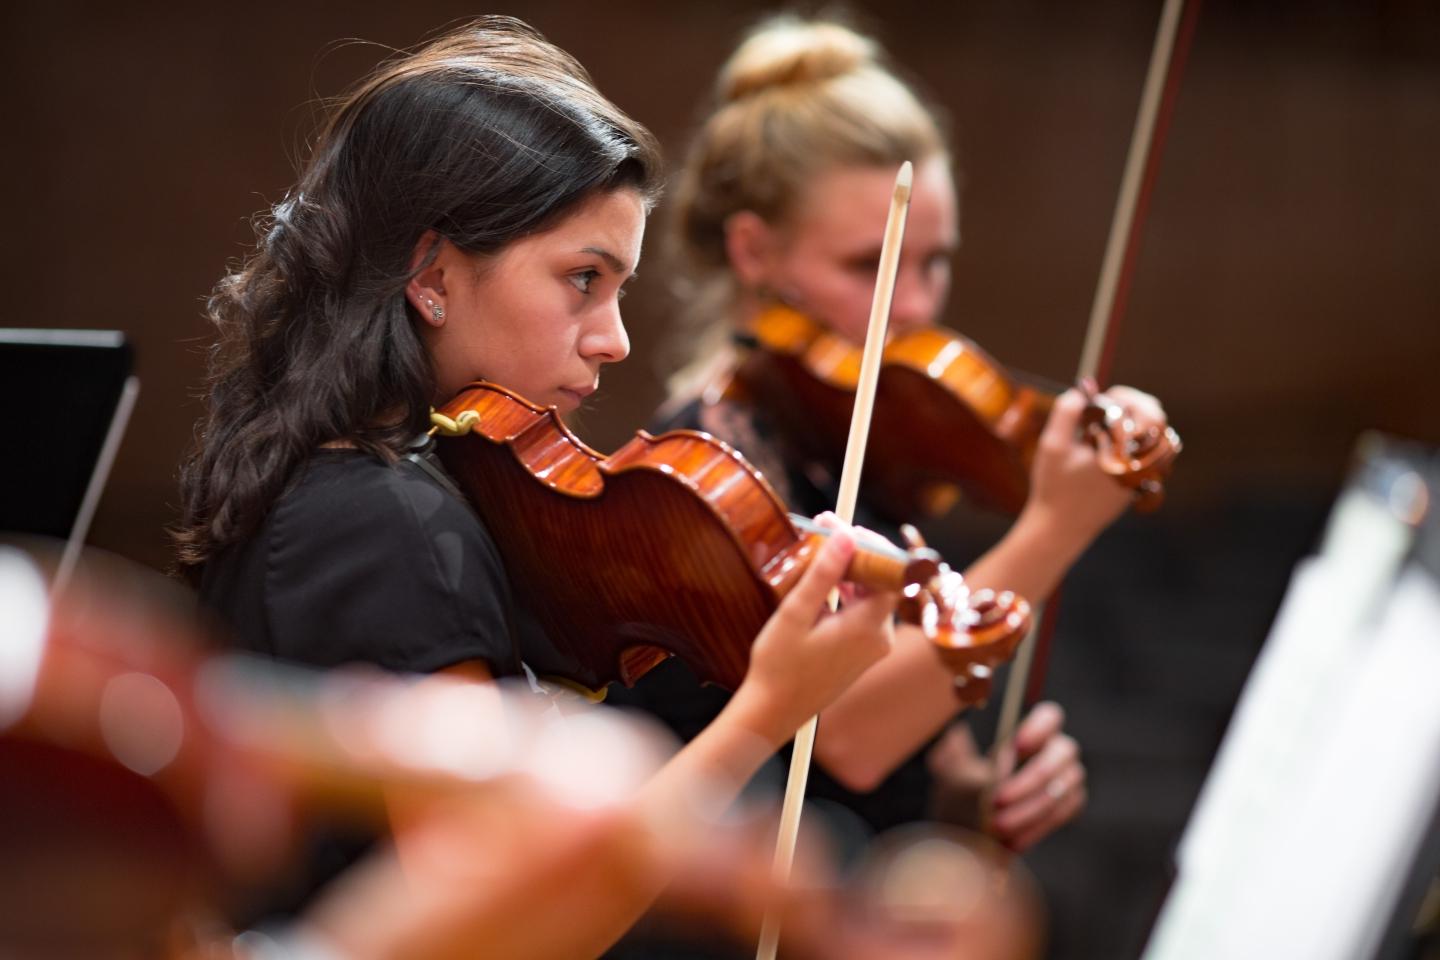 A student plays the violin in-focus with the rest of the orchestra